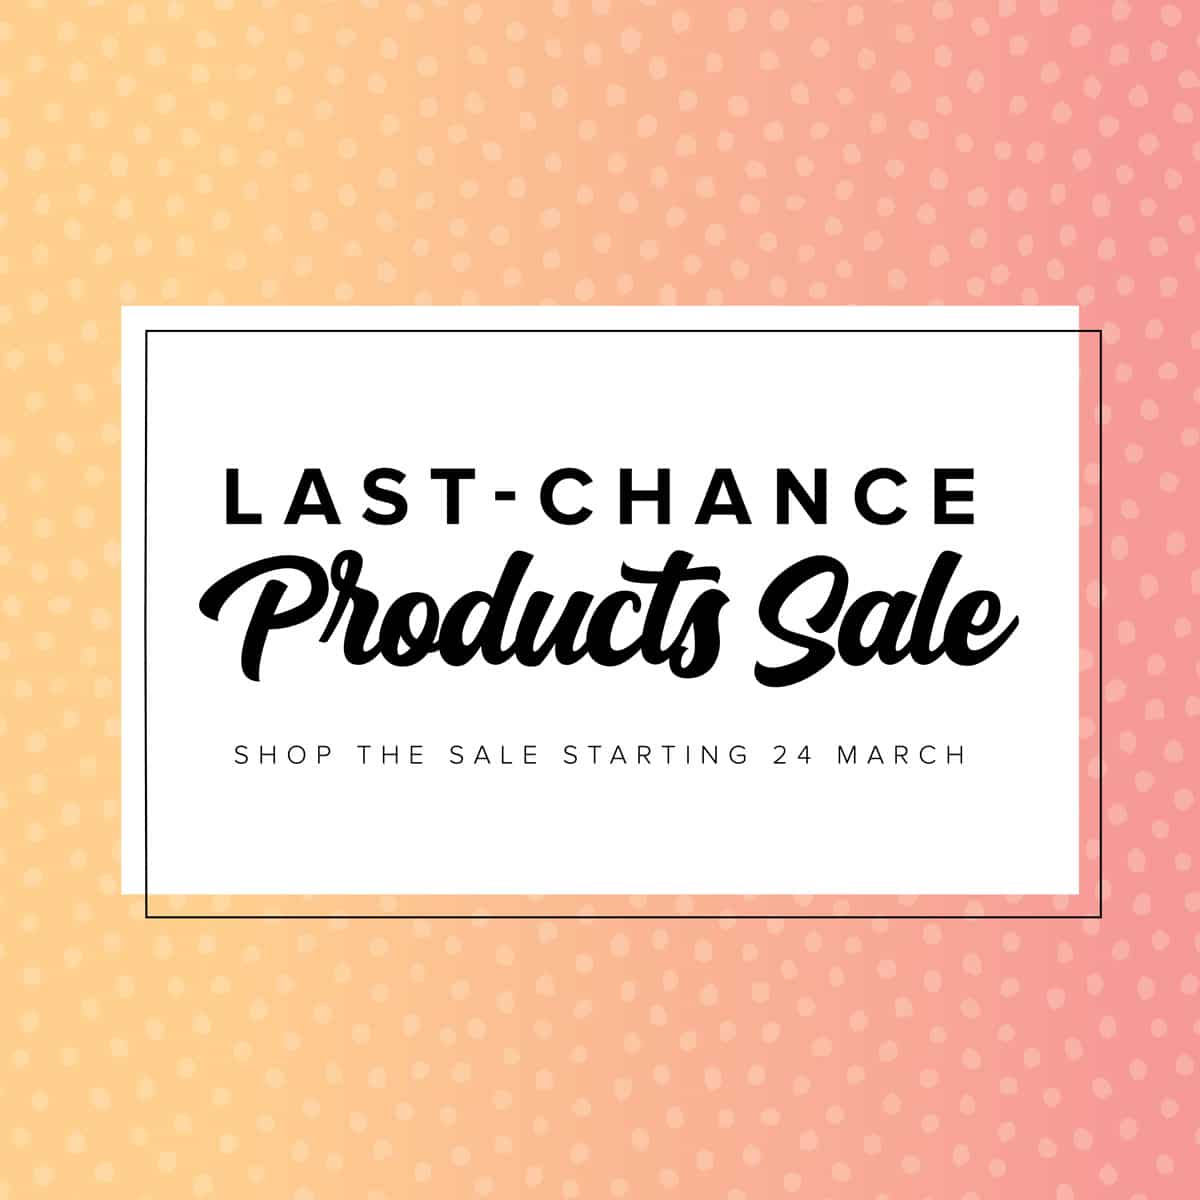 Retiring Products Announced & Last Chance Sale Begins